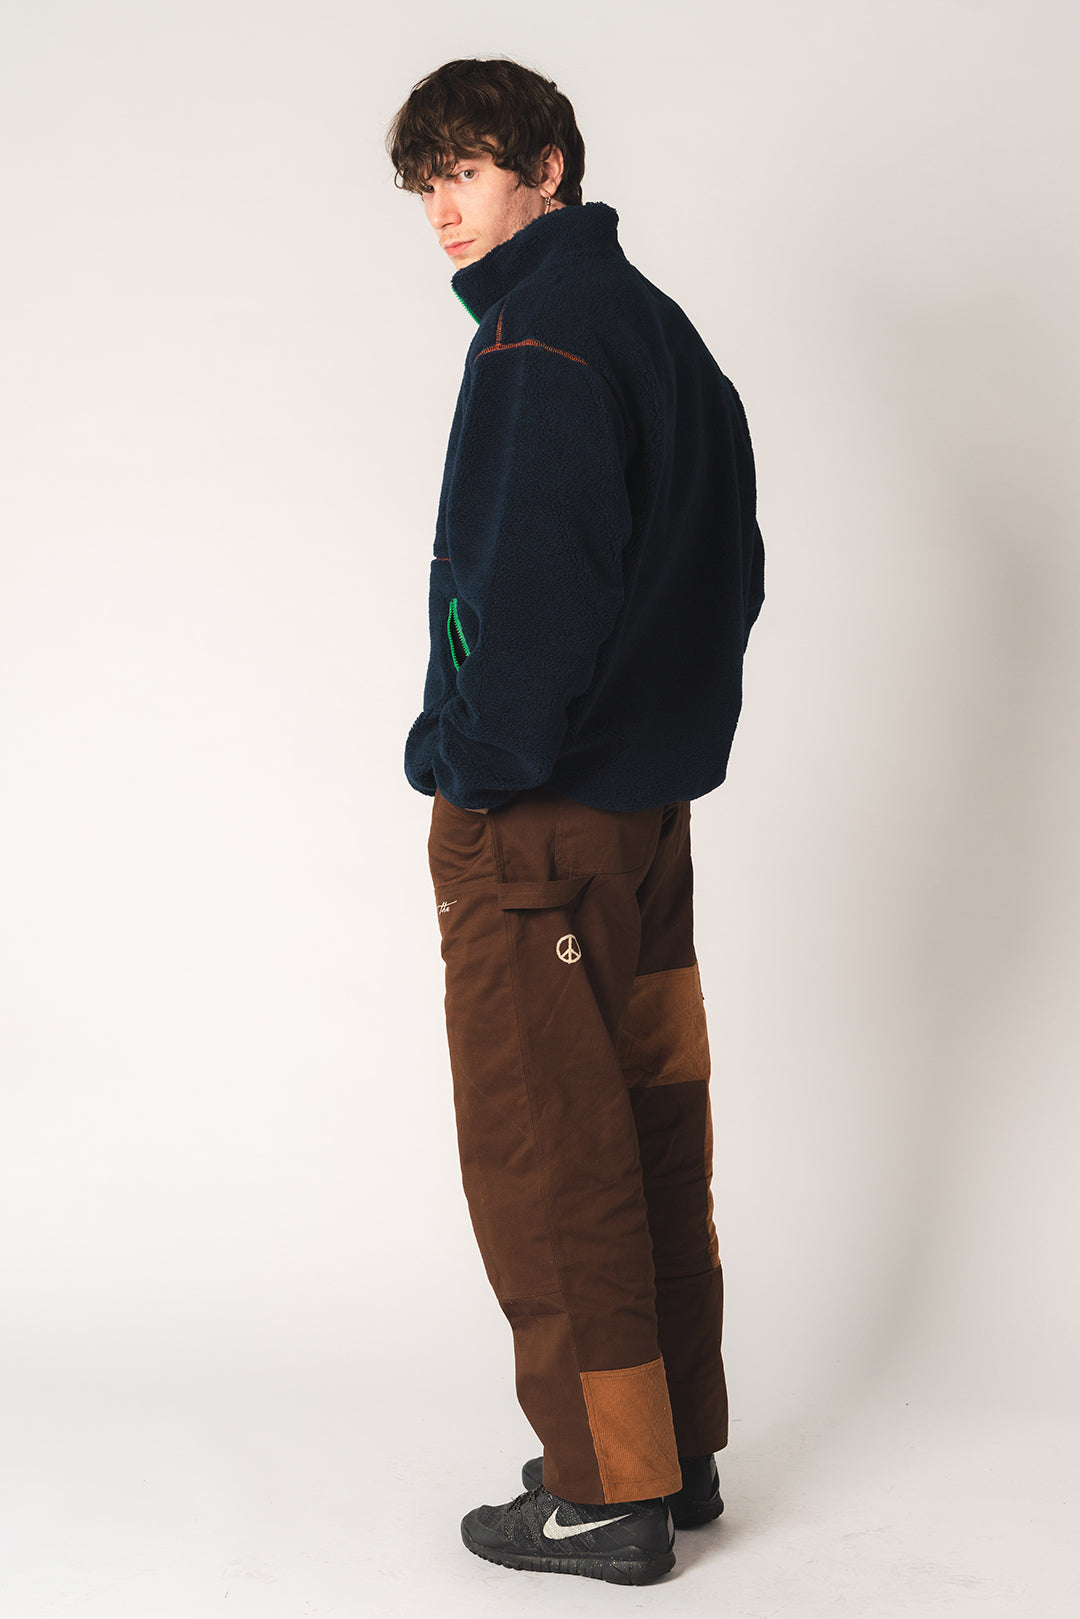 Increase the Peace Work Pant - Brown